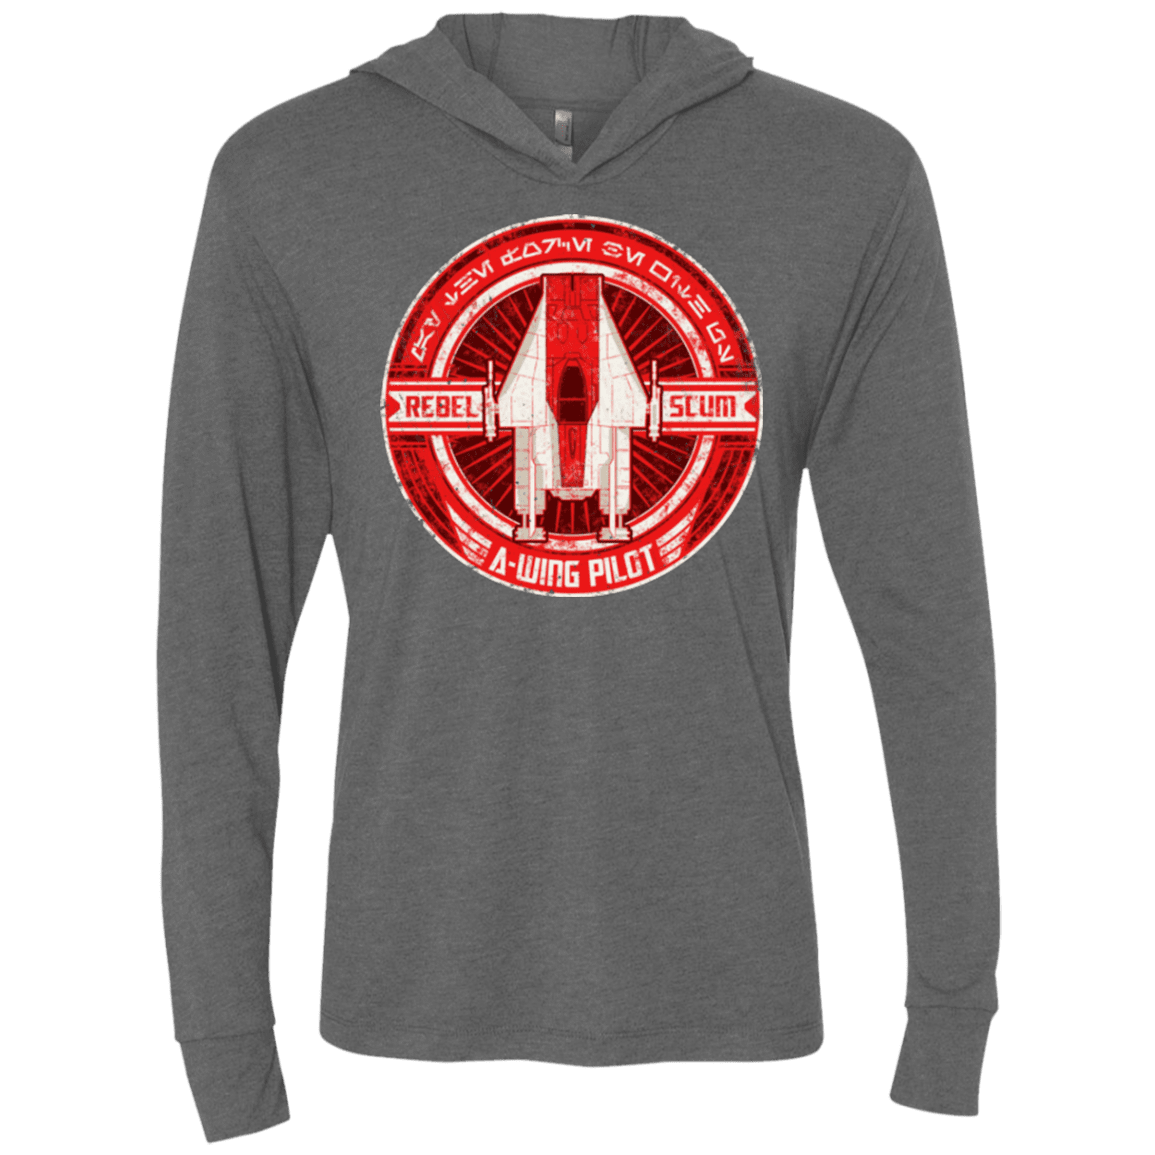 T-Shirts Premium Heather / X-Small A-Wing Triblend Long Sleeve Hoodie Tee